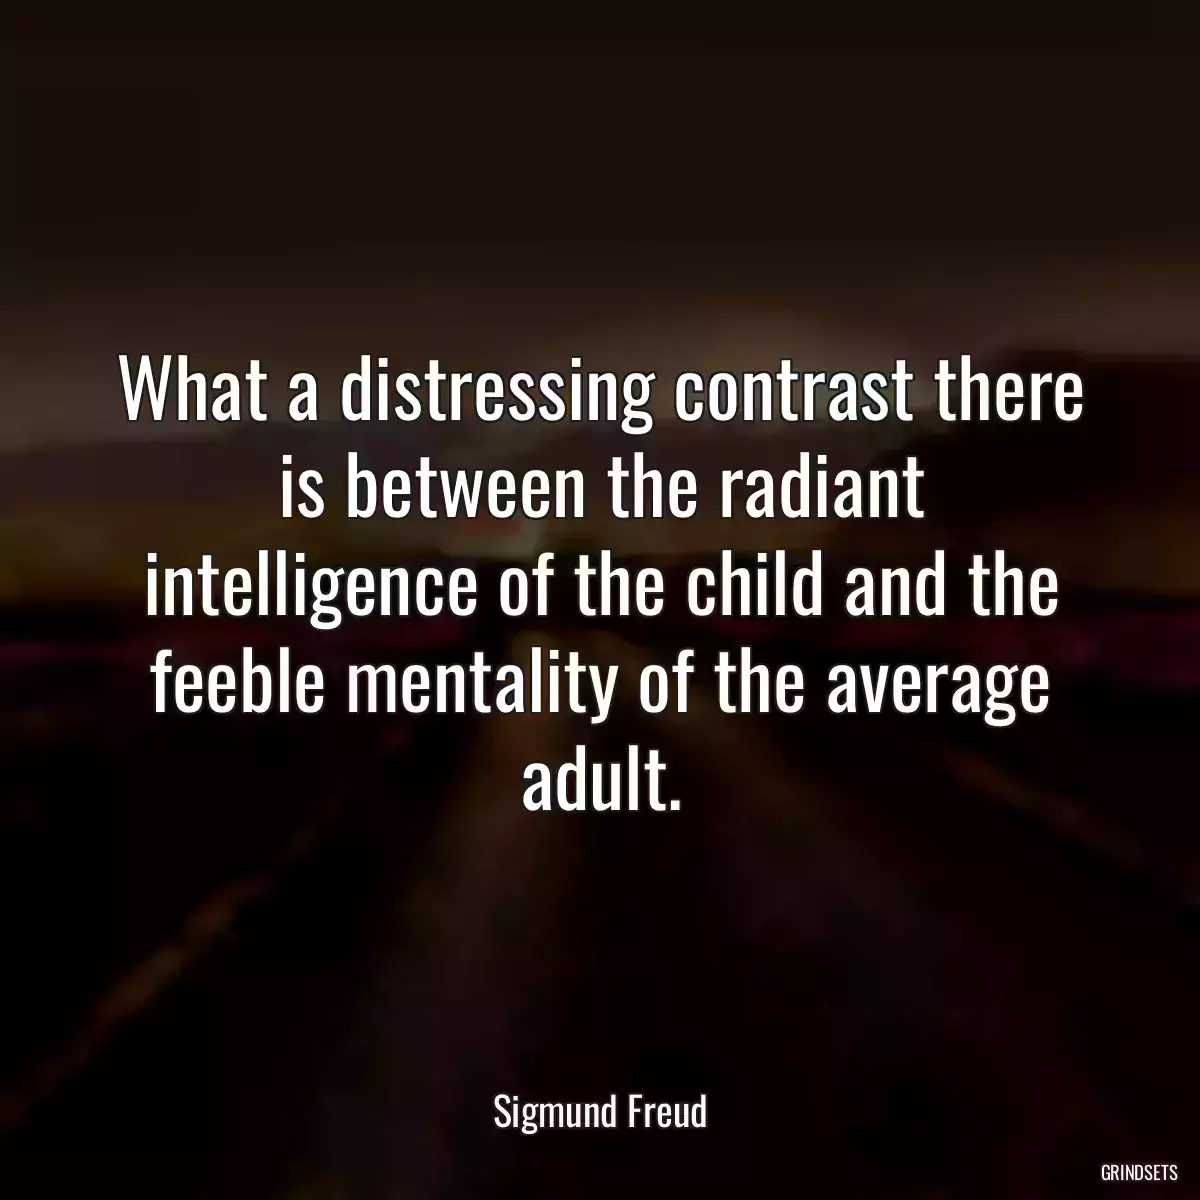 What a distressing contrast there is between the radiant intelligence of the child and the feeble mentality of the average adult.